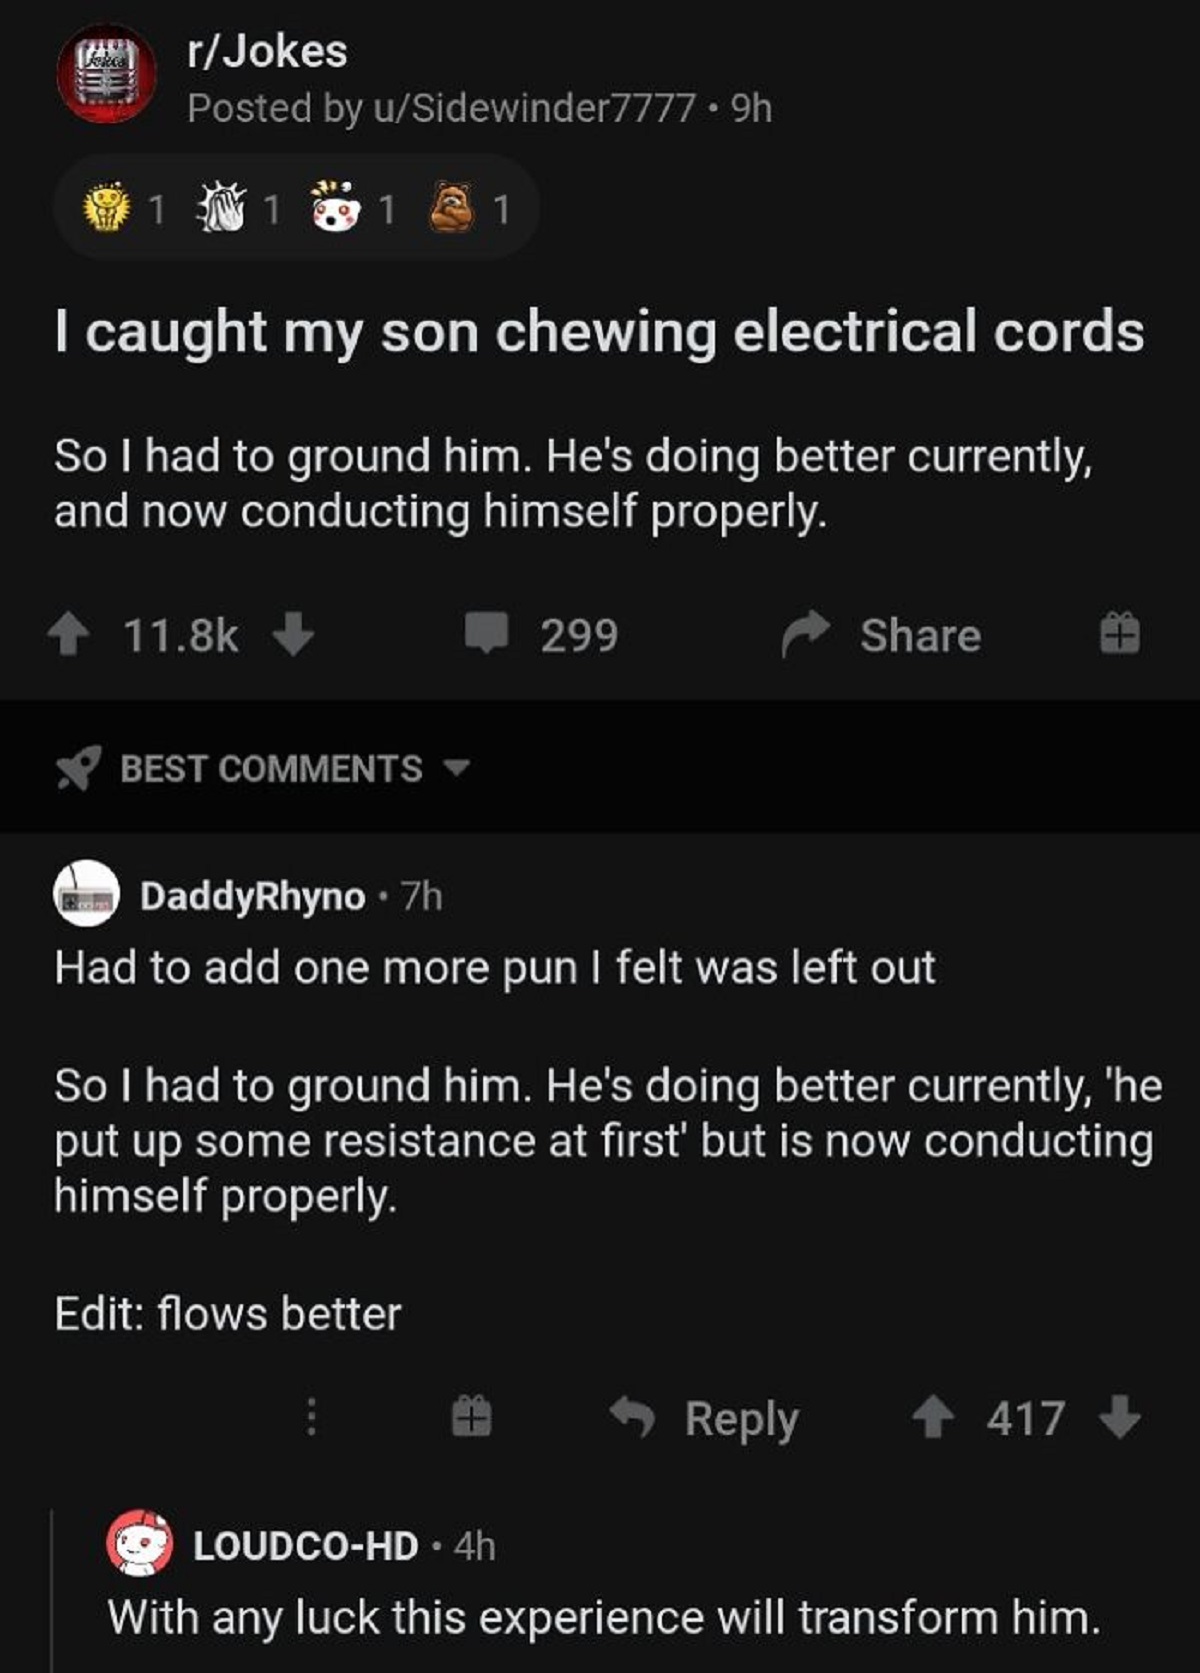 funny replies better than the original - reddit wholesome moments - 1 rJokes Posted by uSidewinder7777.9h 1 1 I caught my son chewing electrical cords So I had to ground him. He's doing better currently, and now conducting himself properly. Best 1 299 Edi